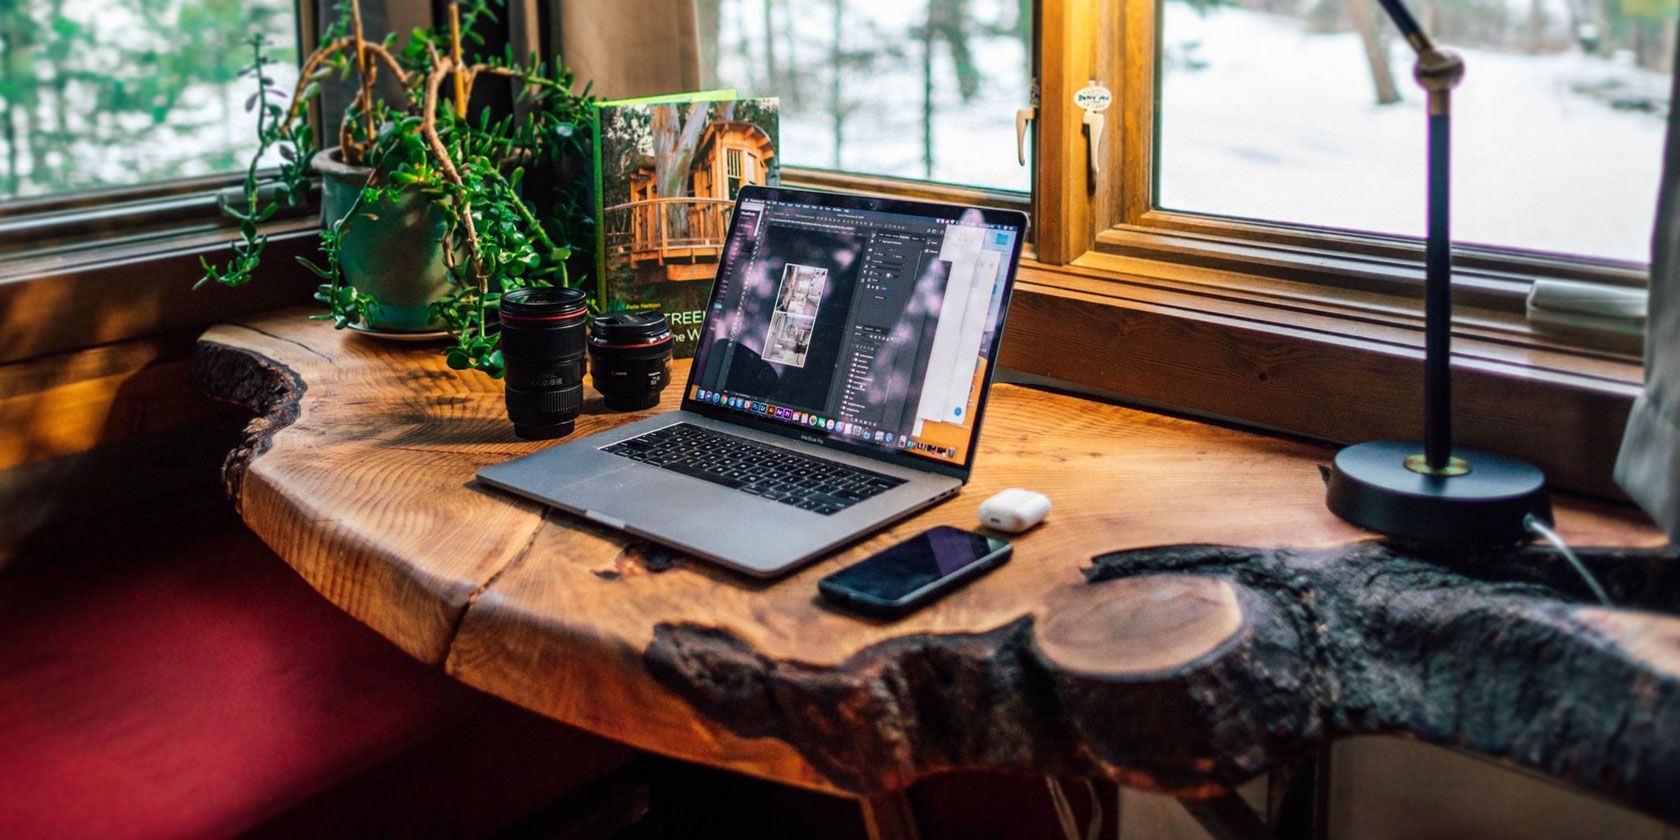 6 Eco-Friendly Products You Need in Every Home Office